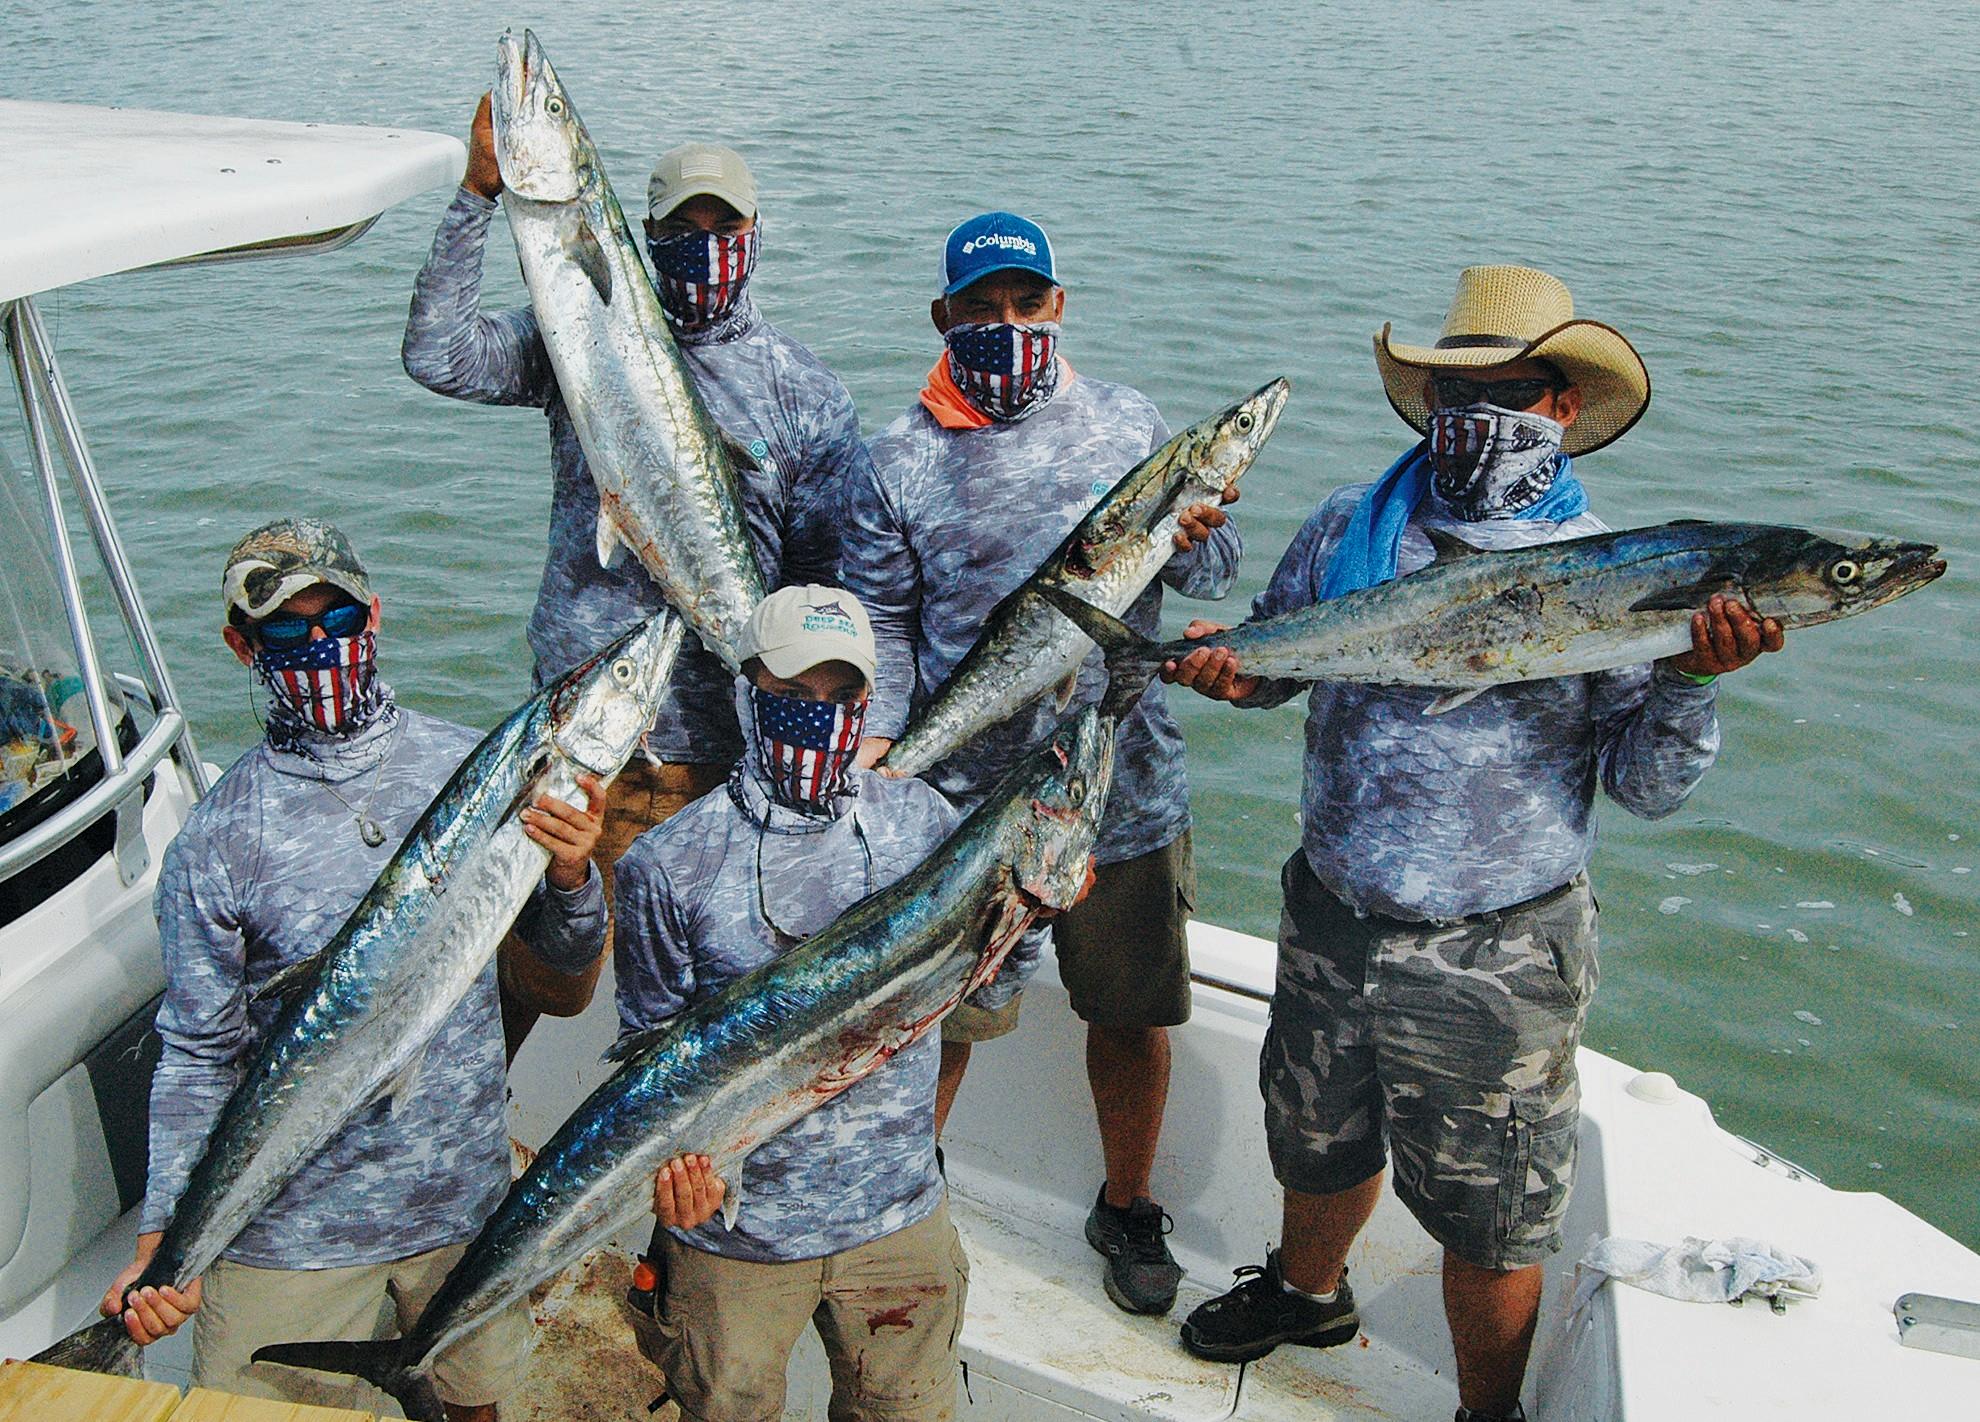 How to choose the best charter fishing experience for your Florida Mahi Mahi Fishing Vacation
